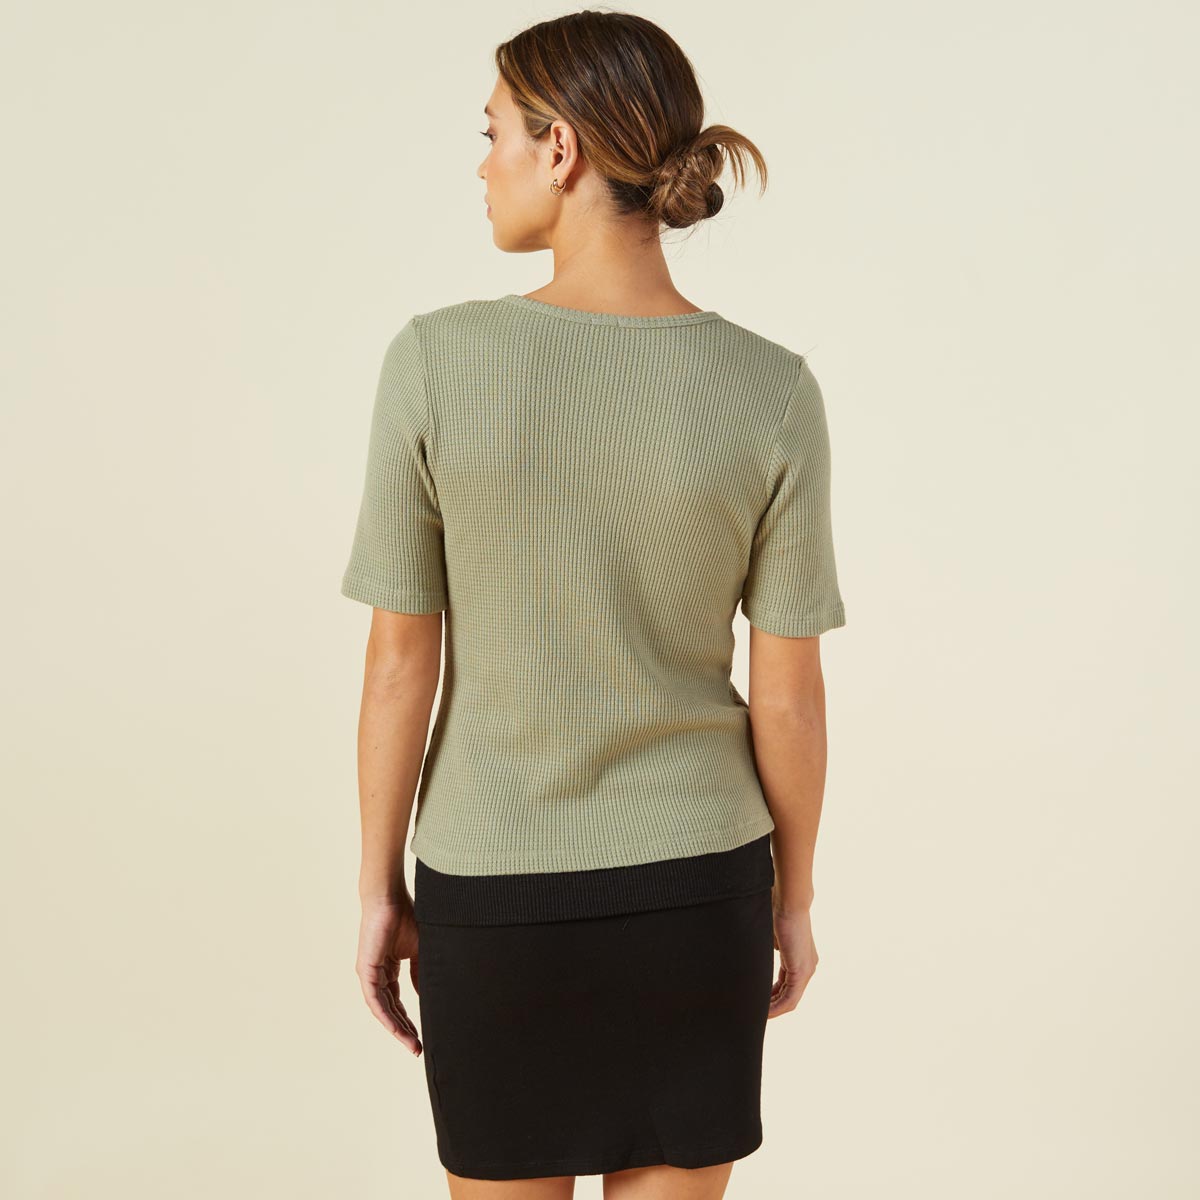 Back view of model wearing the thermal short sleeve henley in laurel green.